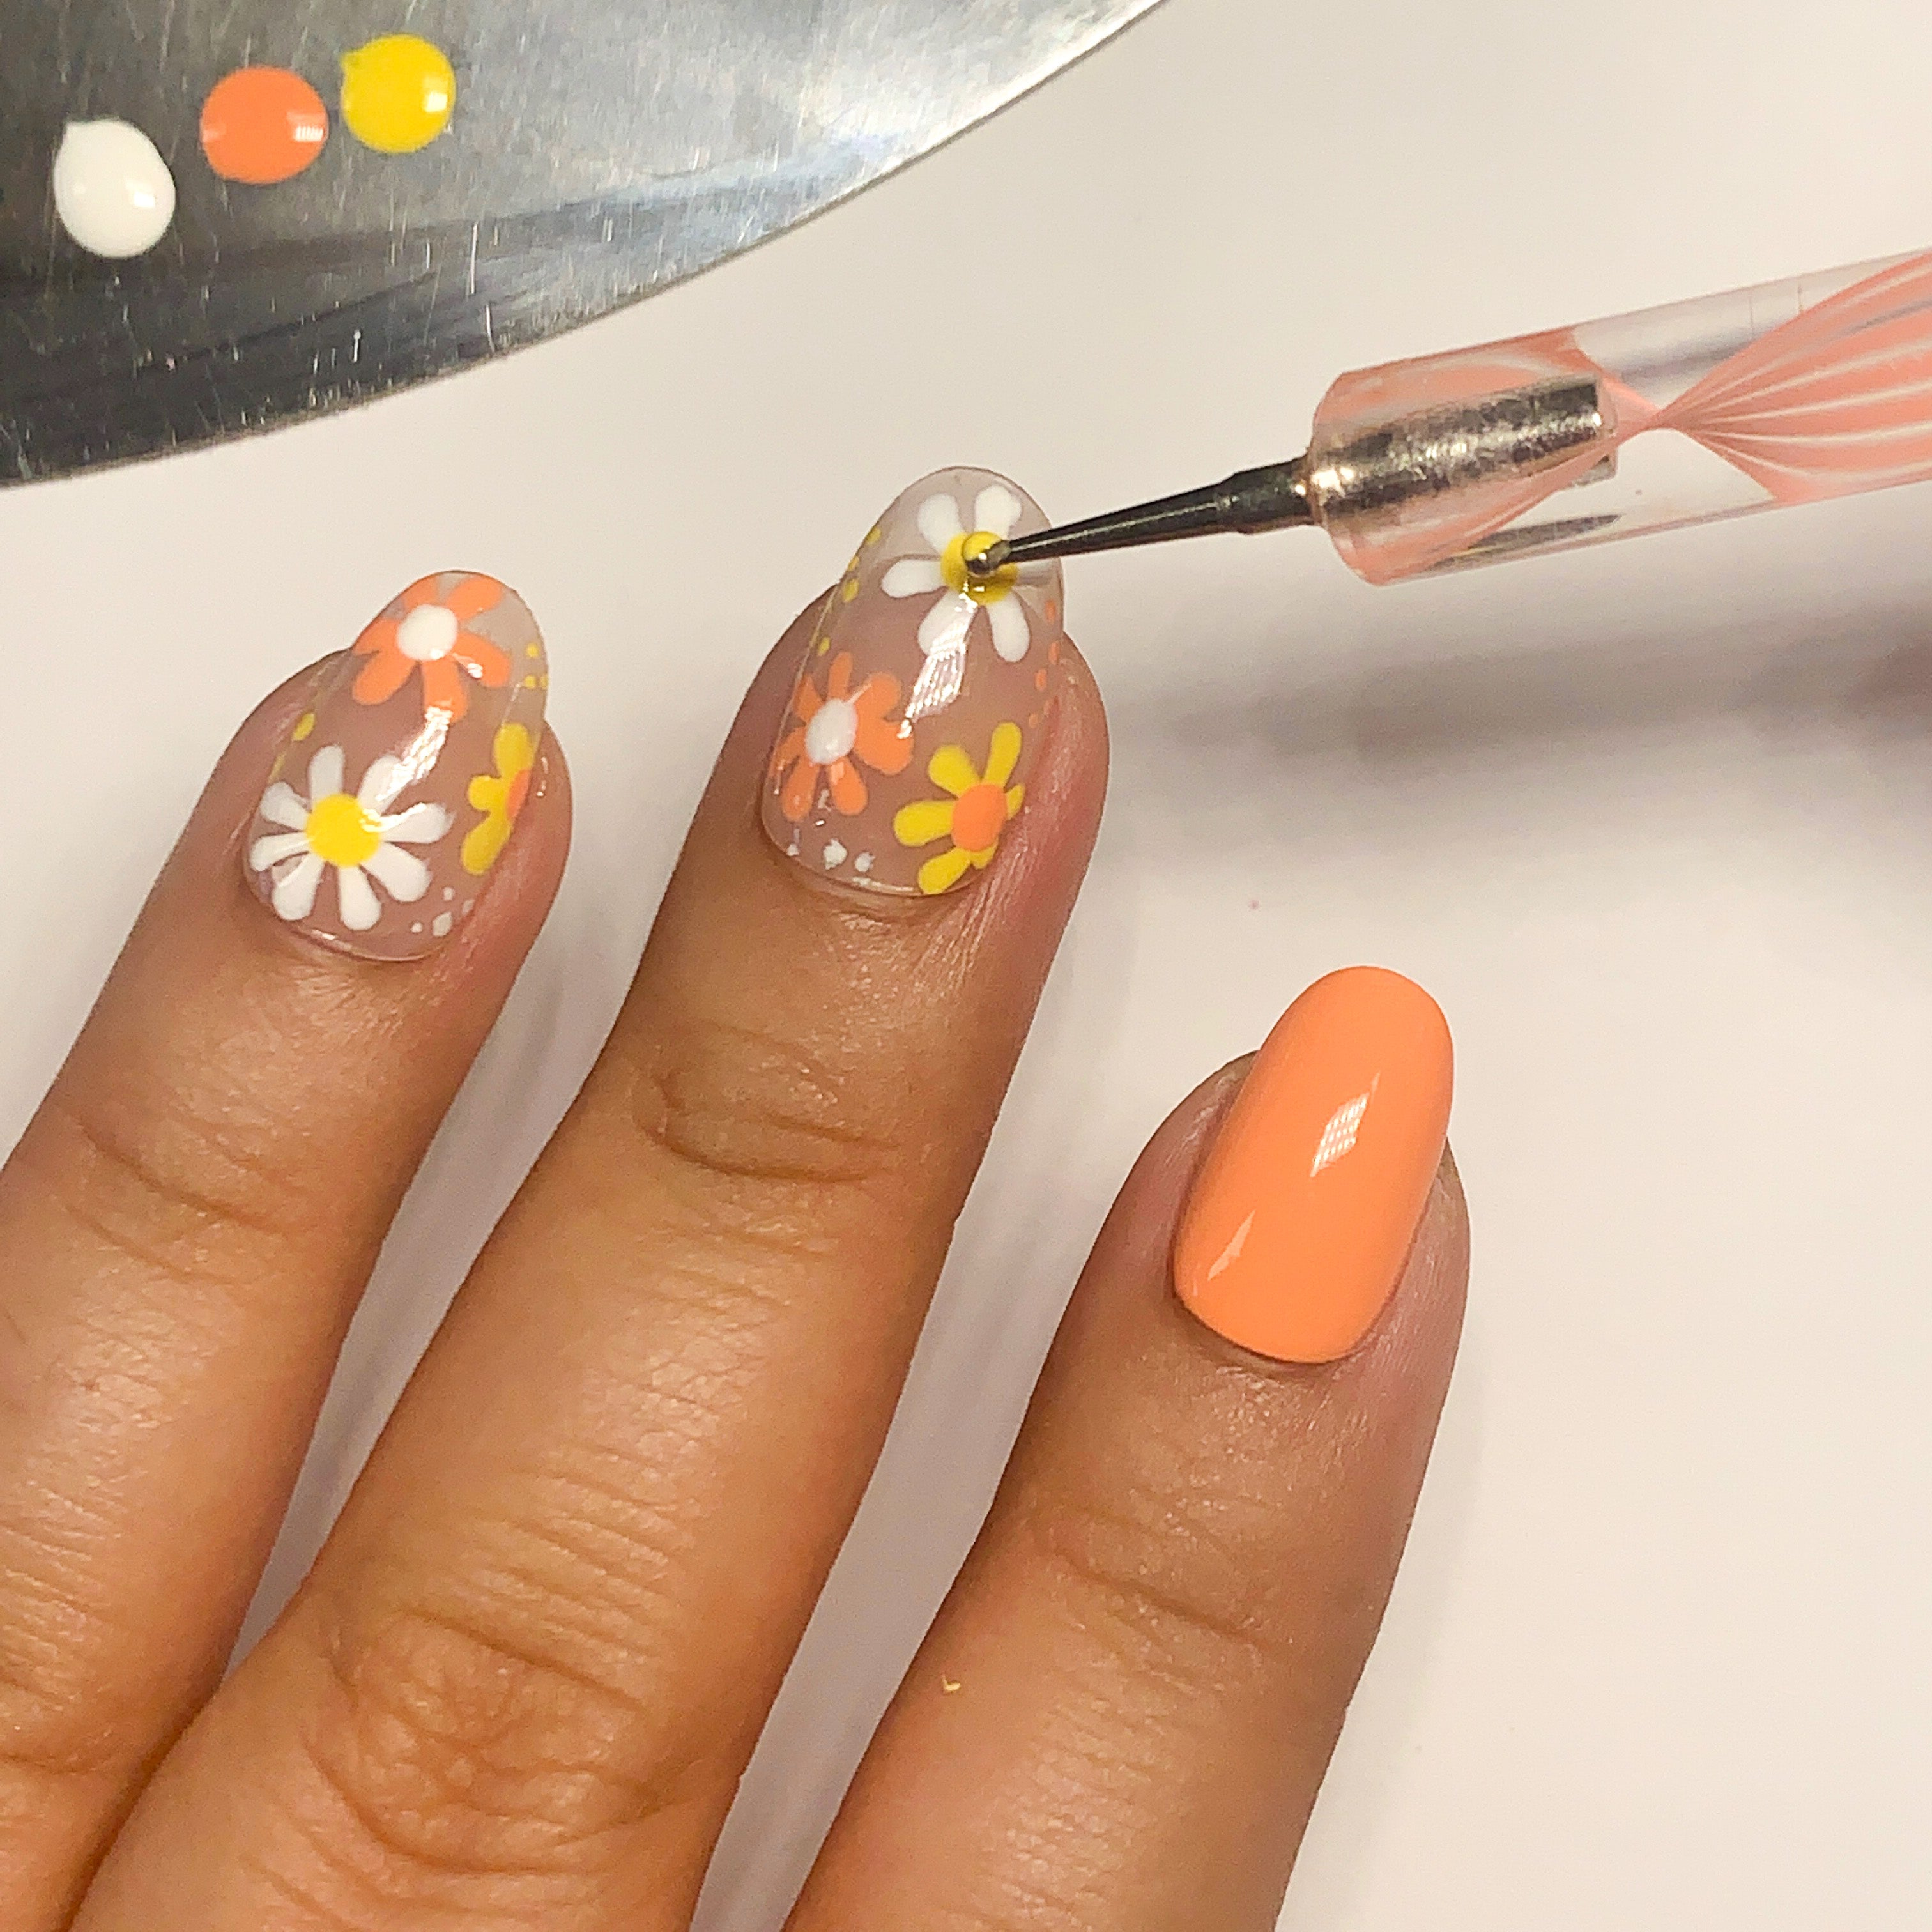 Daisy Nail Art Designs For Easy Diy Manicure At Home